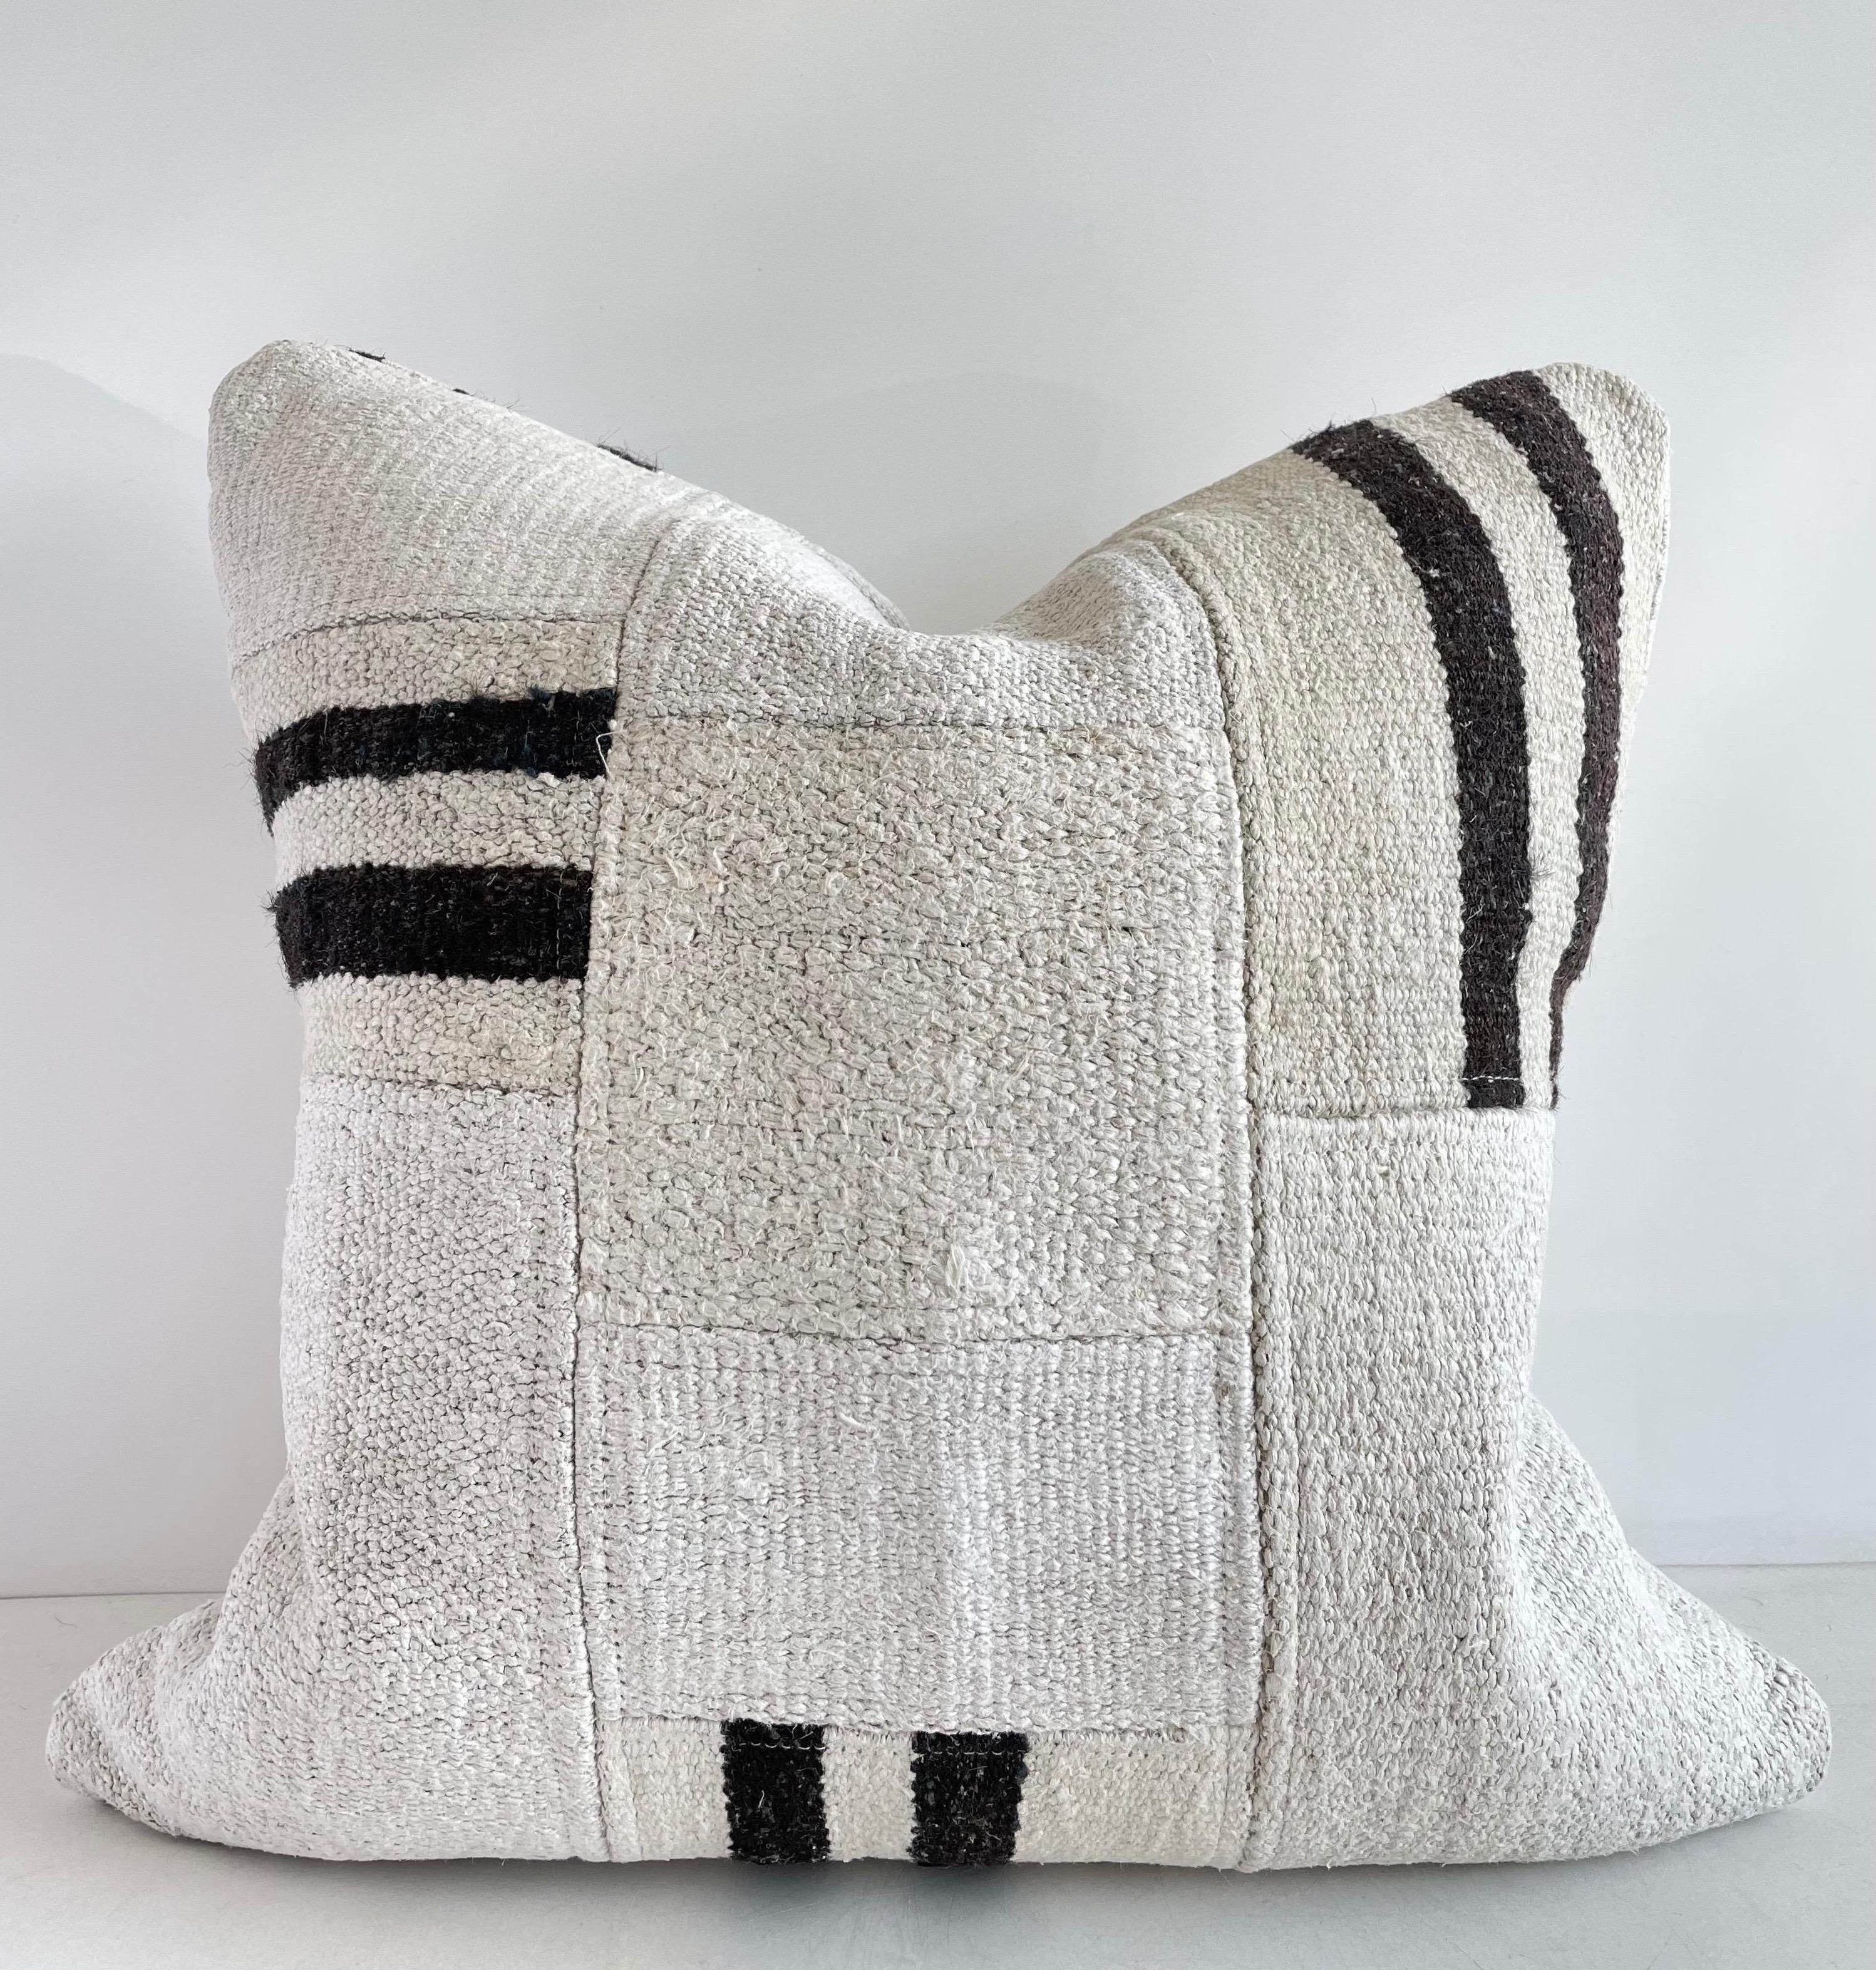 Creamy white hemp rug patchwork style pillow. Unique patchwork pillow has been made with parts of different Turkish rugs, in multiple white tones and stripes in brown. Double sided rug pillow has patchwork on both sides, and hidden zipper closure.